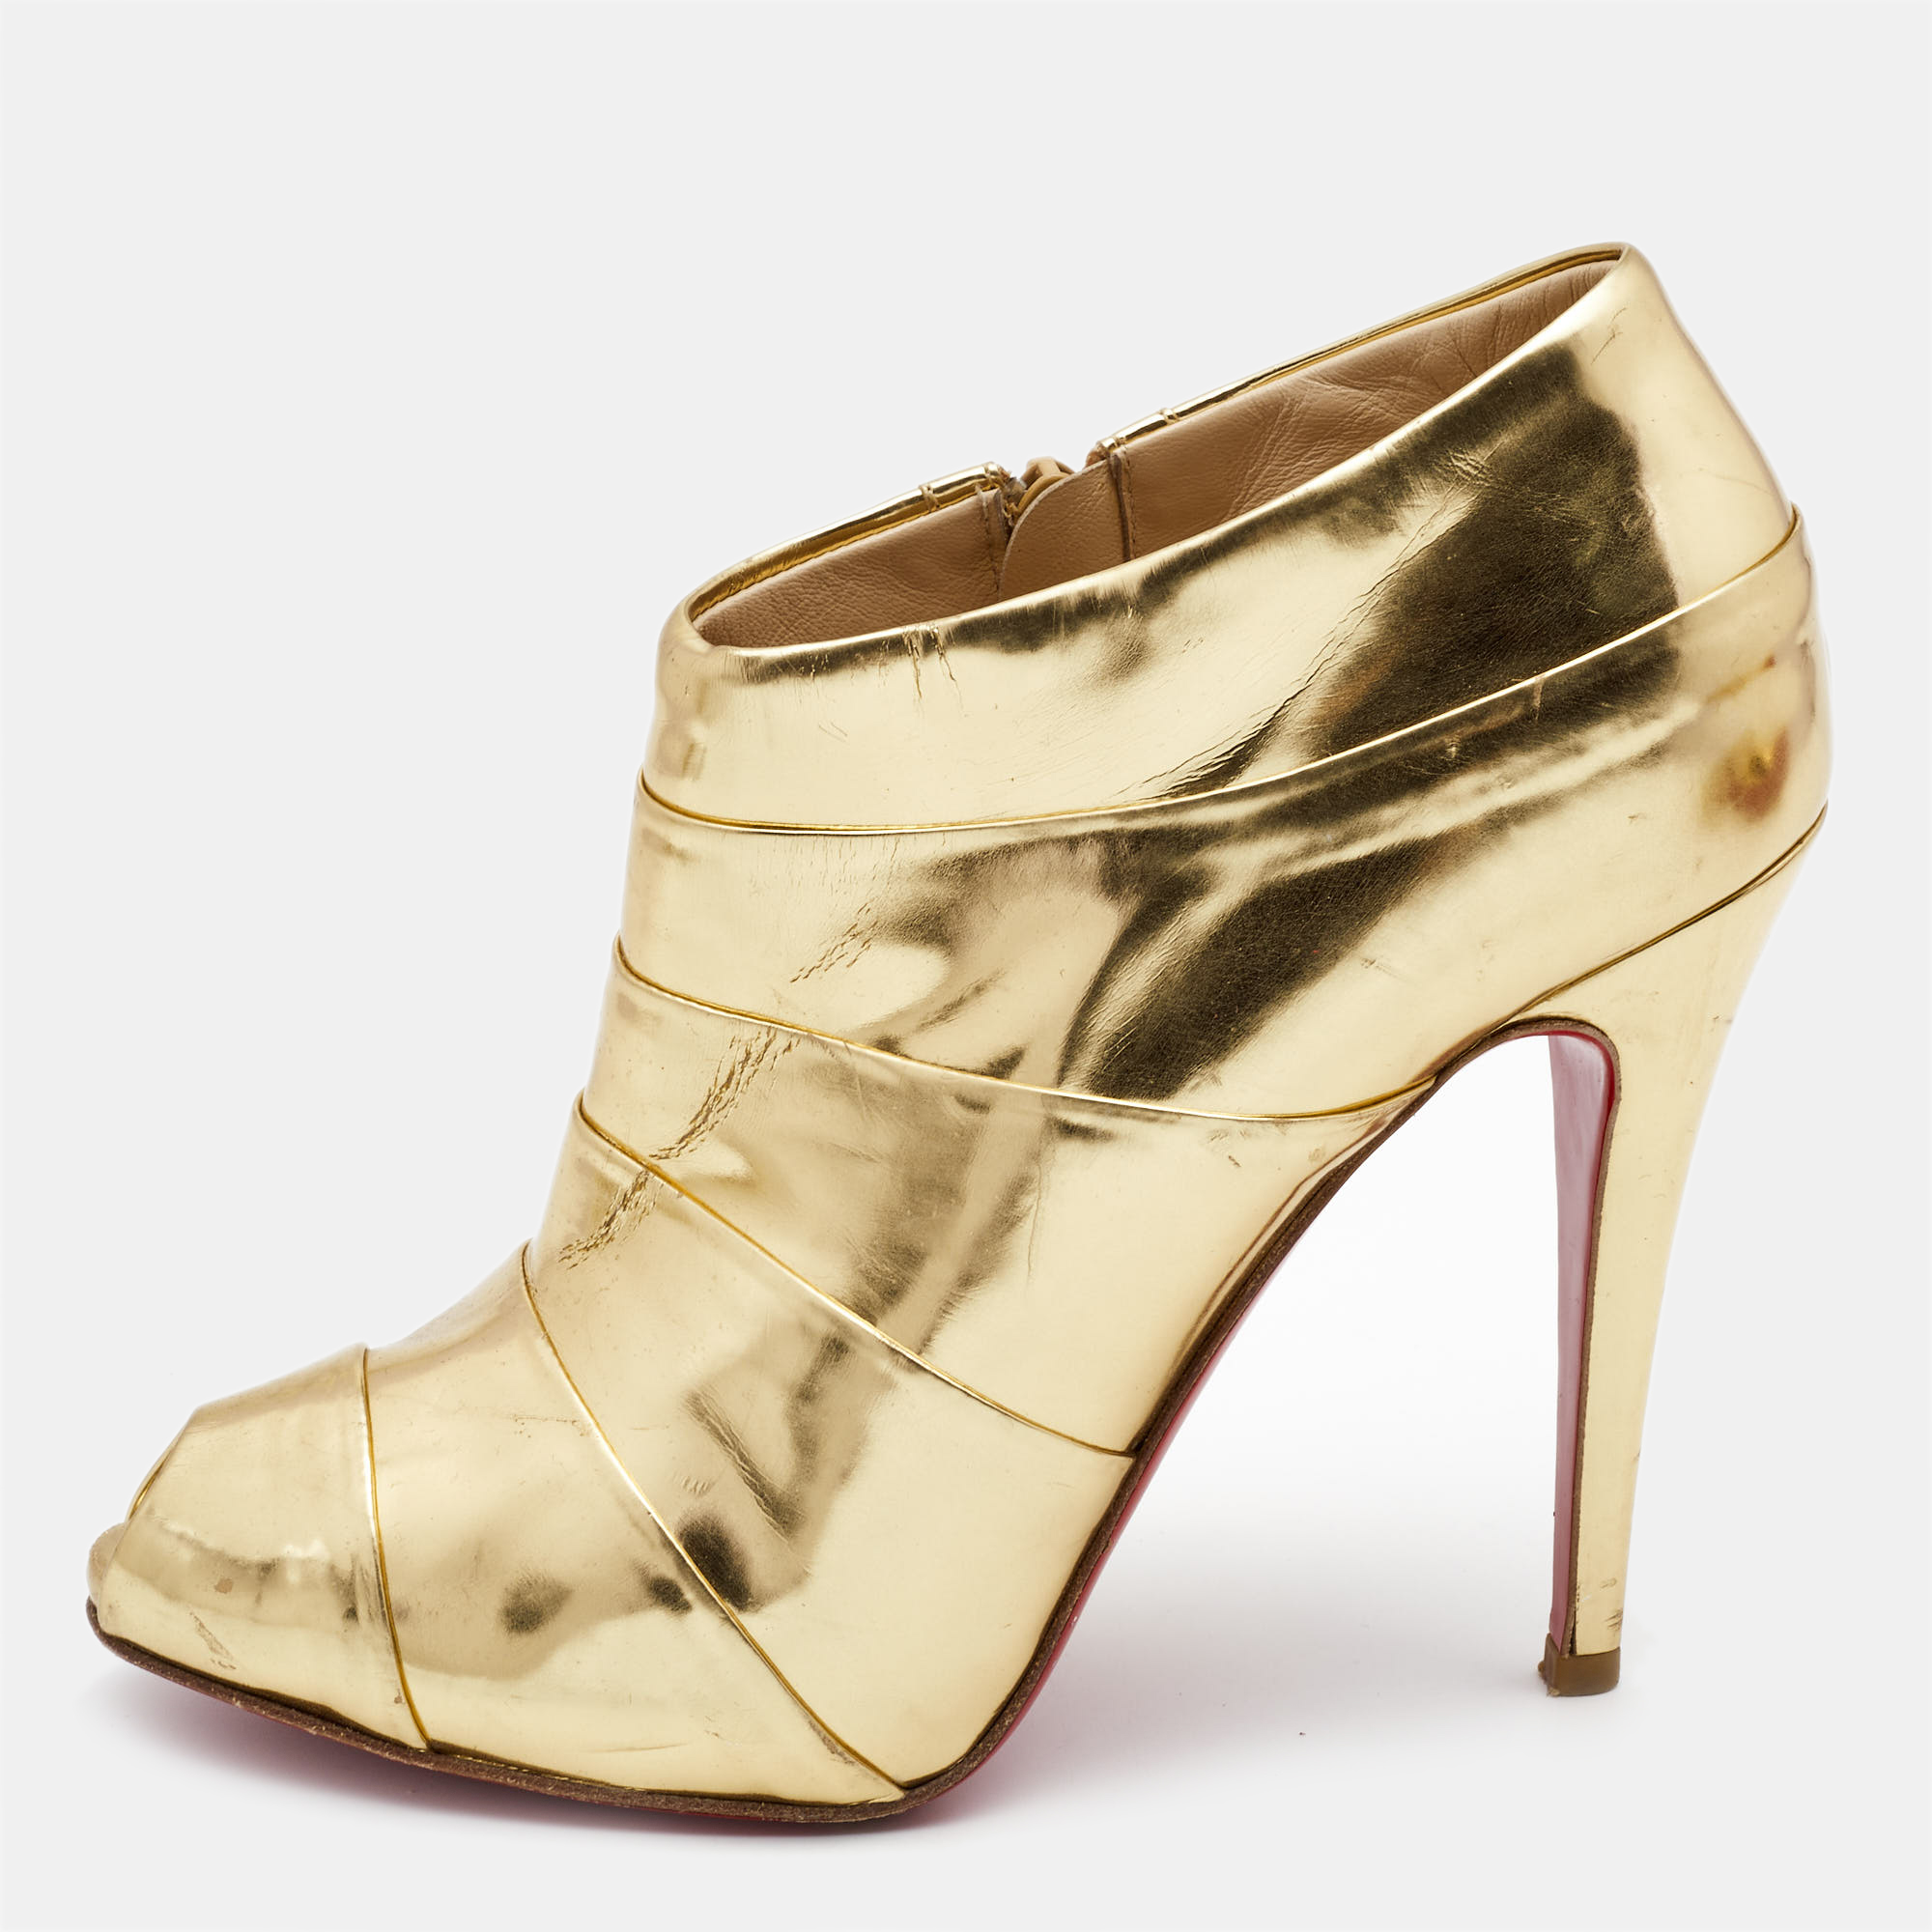 Christian louboutin gold leather robot booties size 39